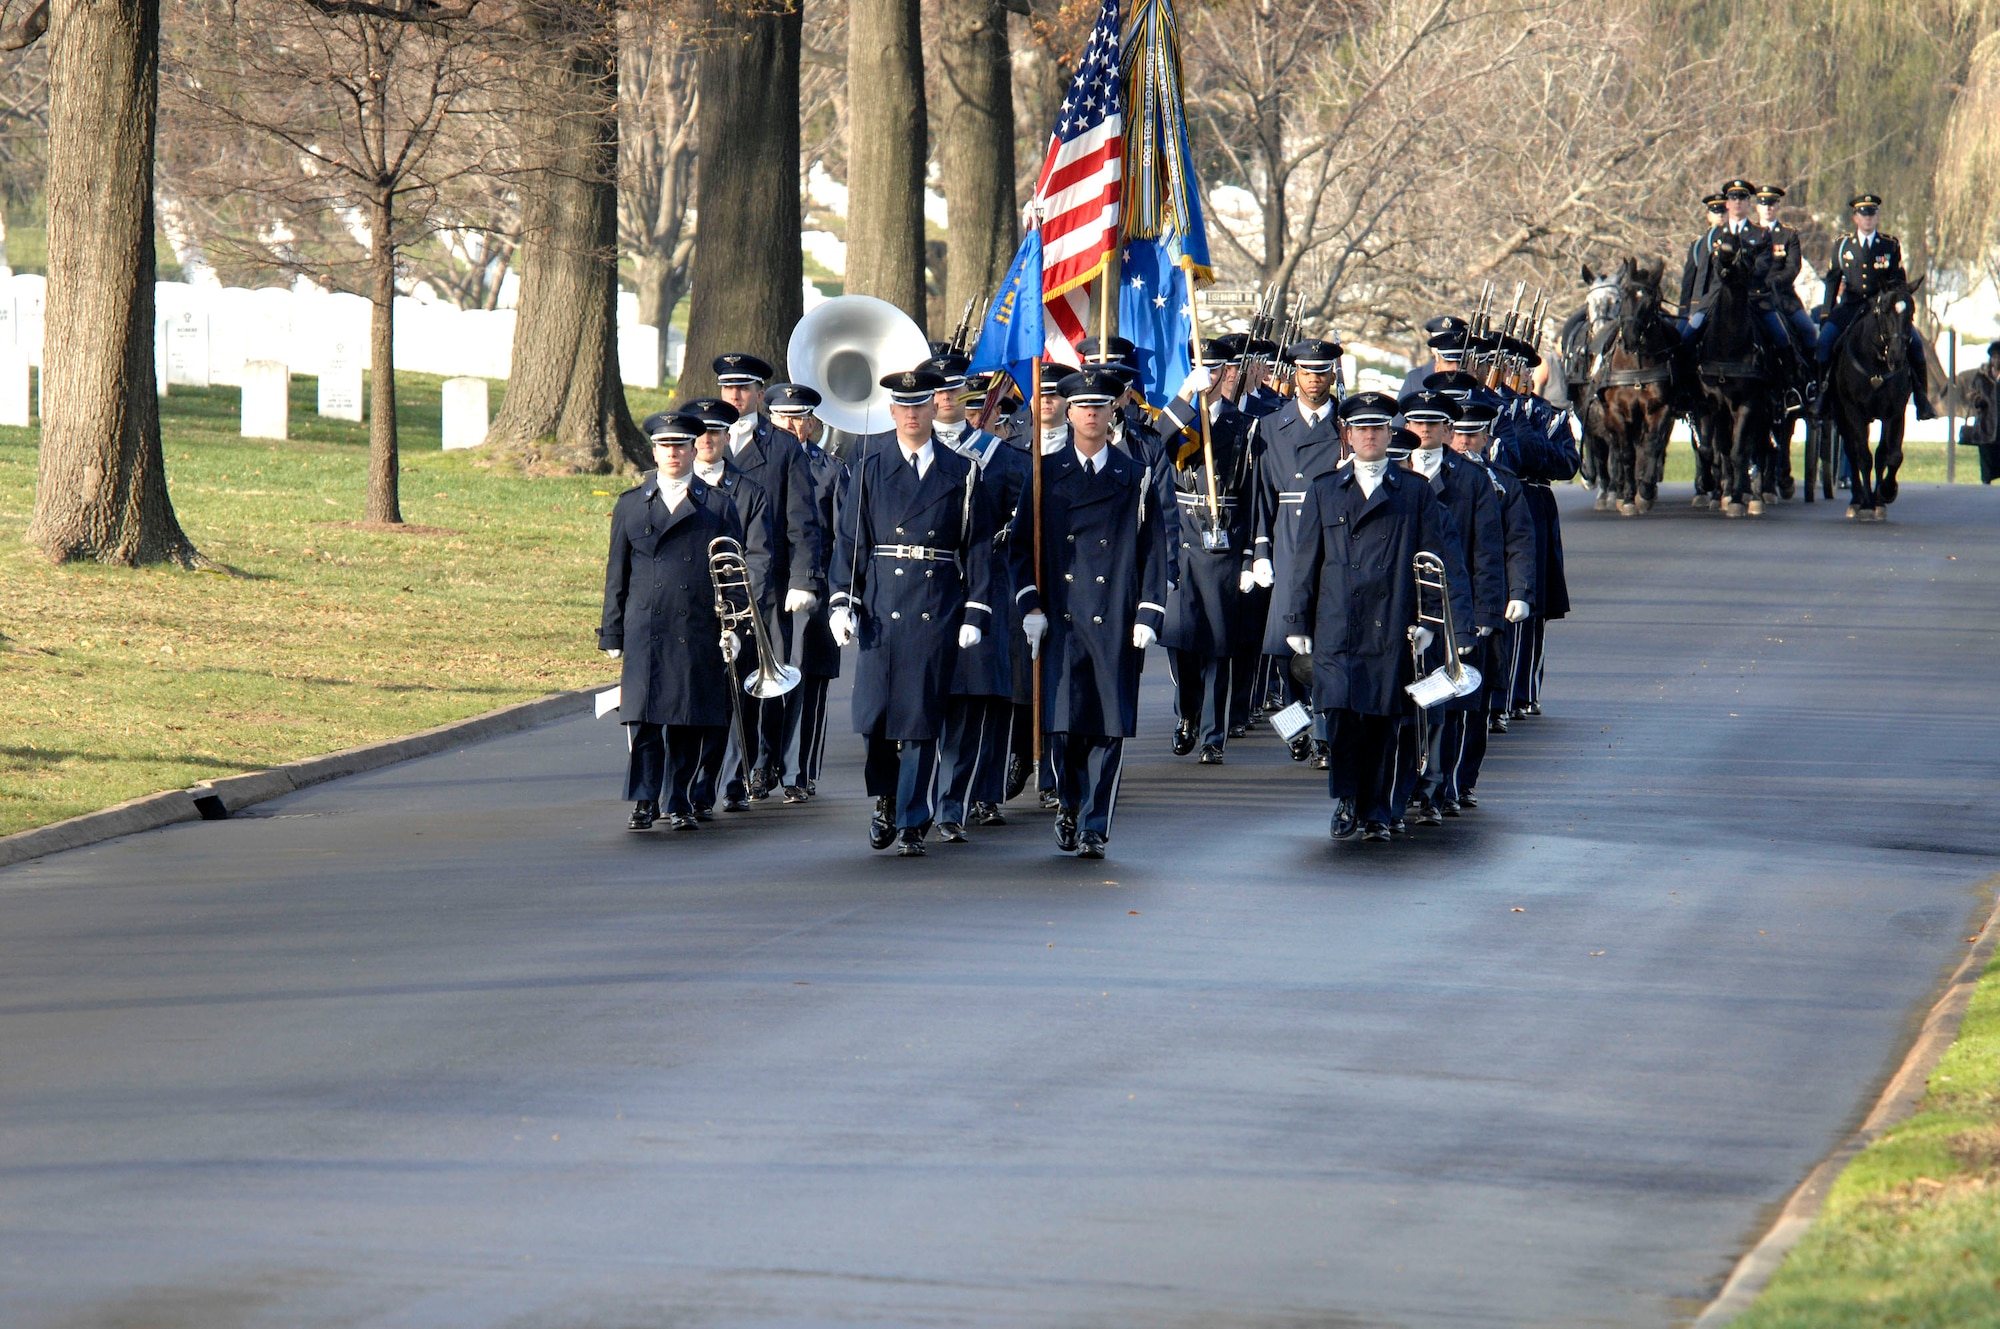 The Air Force Band and Honor Guard lead a funeral procession comprised of the Army Cason and friends and relatives of Capt. Kermit Evans Dec. 12 at Arlington National Cemetery. The cason are transporting the body of Captain Evans while more than 200 friends and relatives follow along to pay their respects to the former member of the 27th Civil Engineering Squadron Explosives Ordnance Disposal Flight at Cannon Air Force Base, N.M. He was deployed to Iraq when the helicopter he was a passenger in made an emergency landing and crashed. He was one of the four out of 16 who were killed as a result of the crash. He is survived by his wife, Perneatha, and Kermit Jr., their 13-month-old son.(U.S. Air Force photo/Tech. Sgt. Cohen Young) 